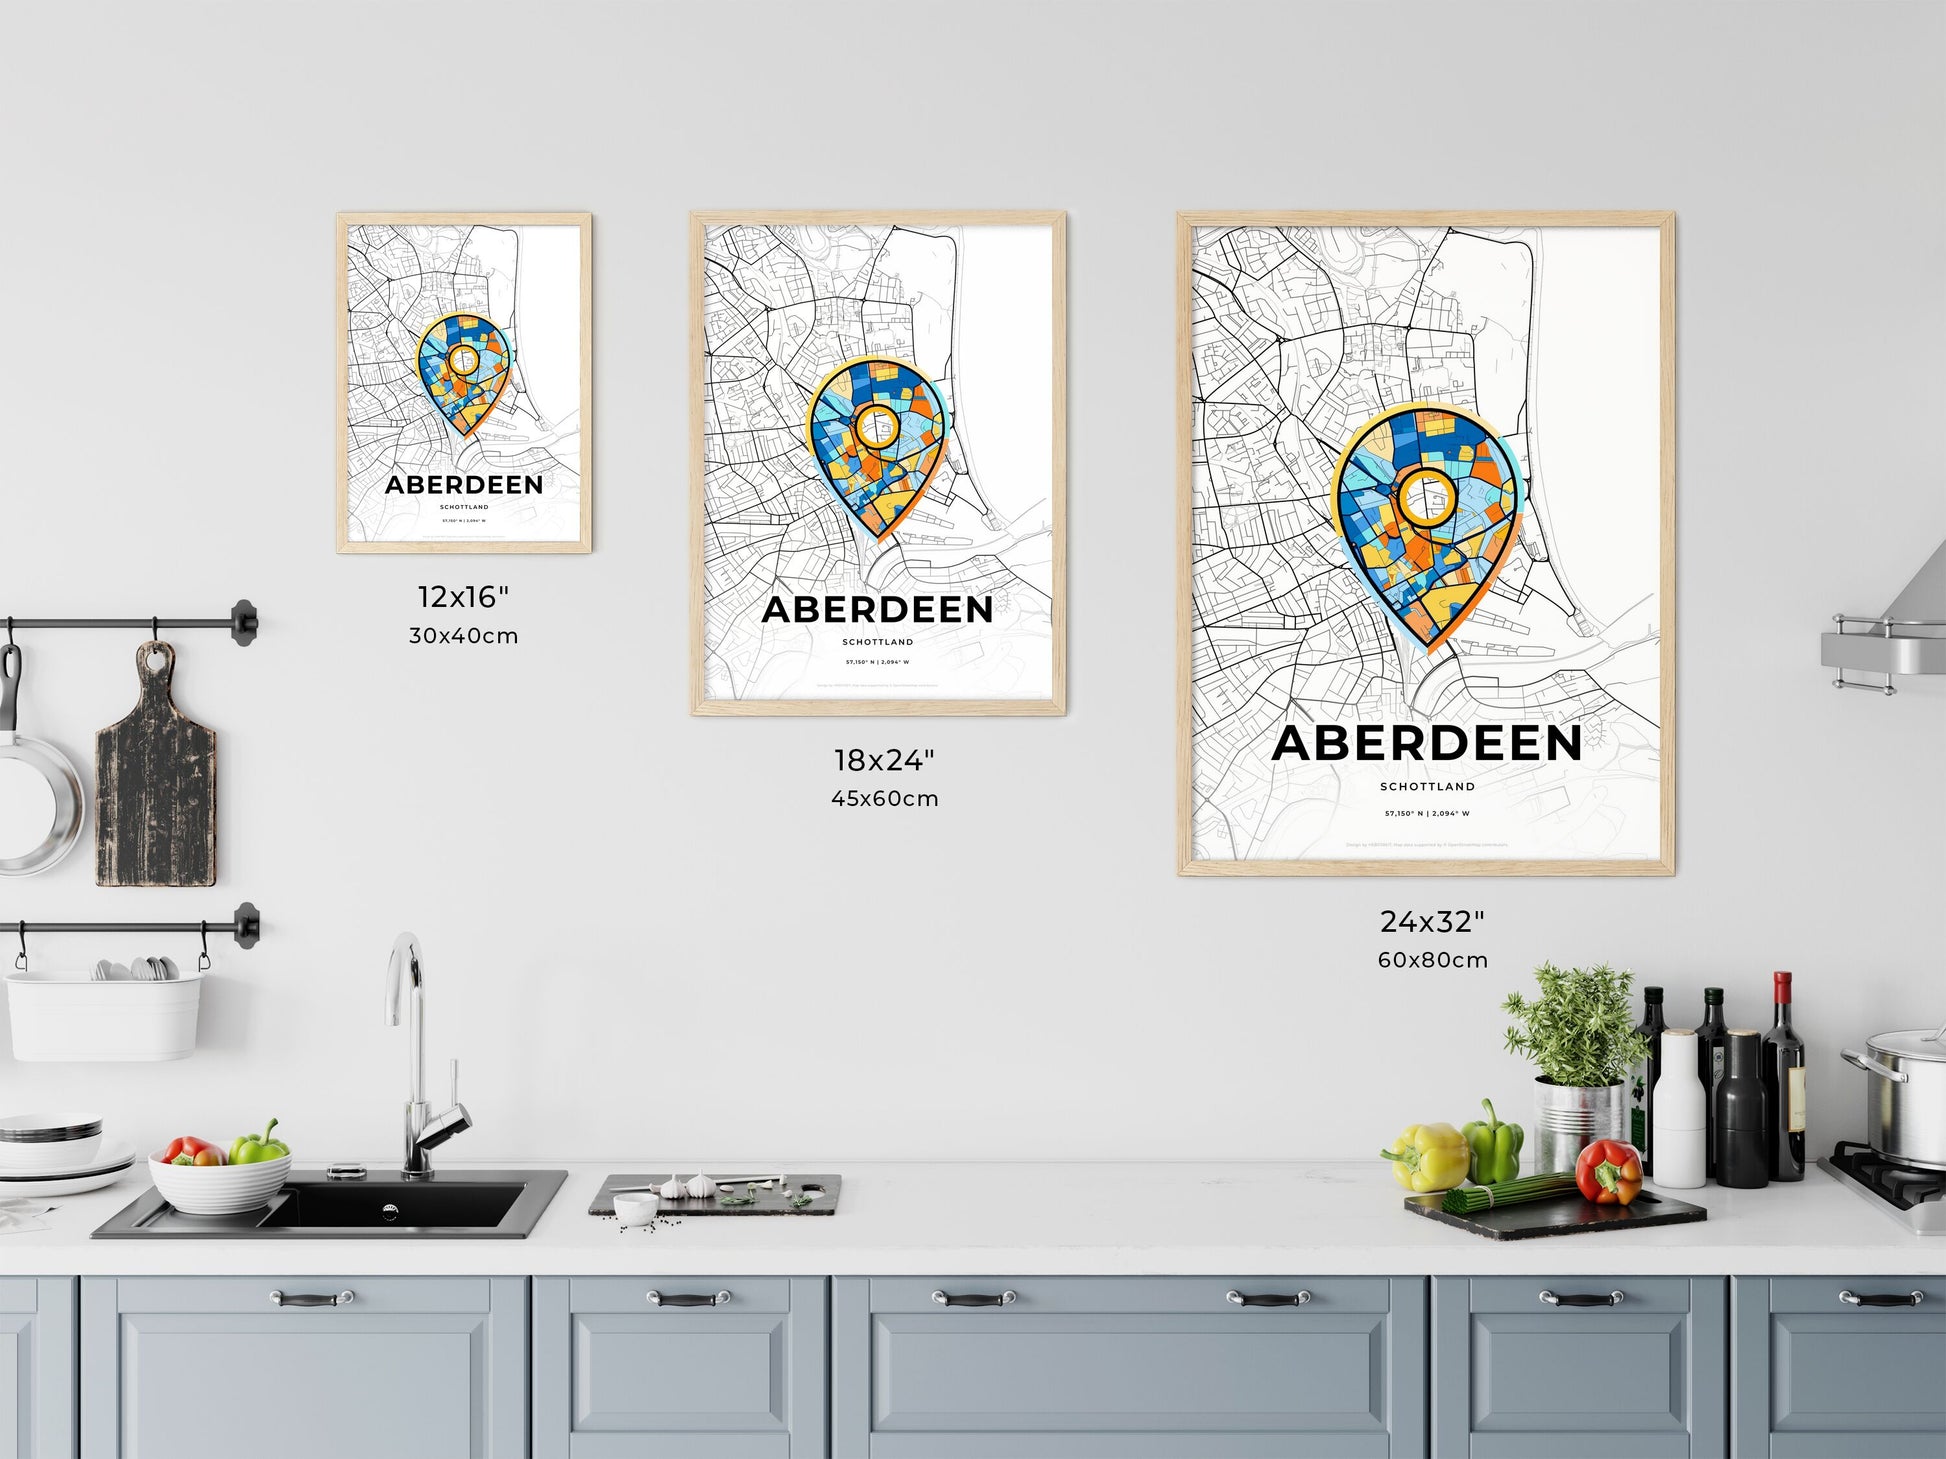 ABERDEEN SCOTLAND minimal art map with a colorful icon. Where it all began, Couple map gift.